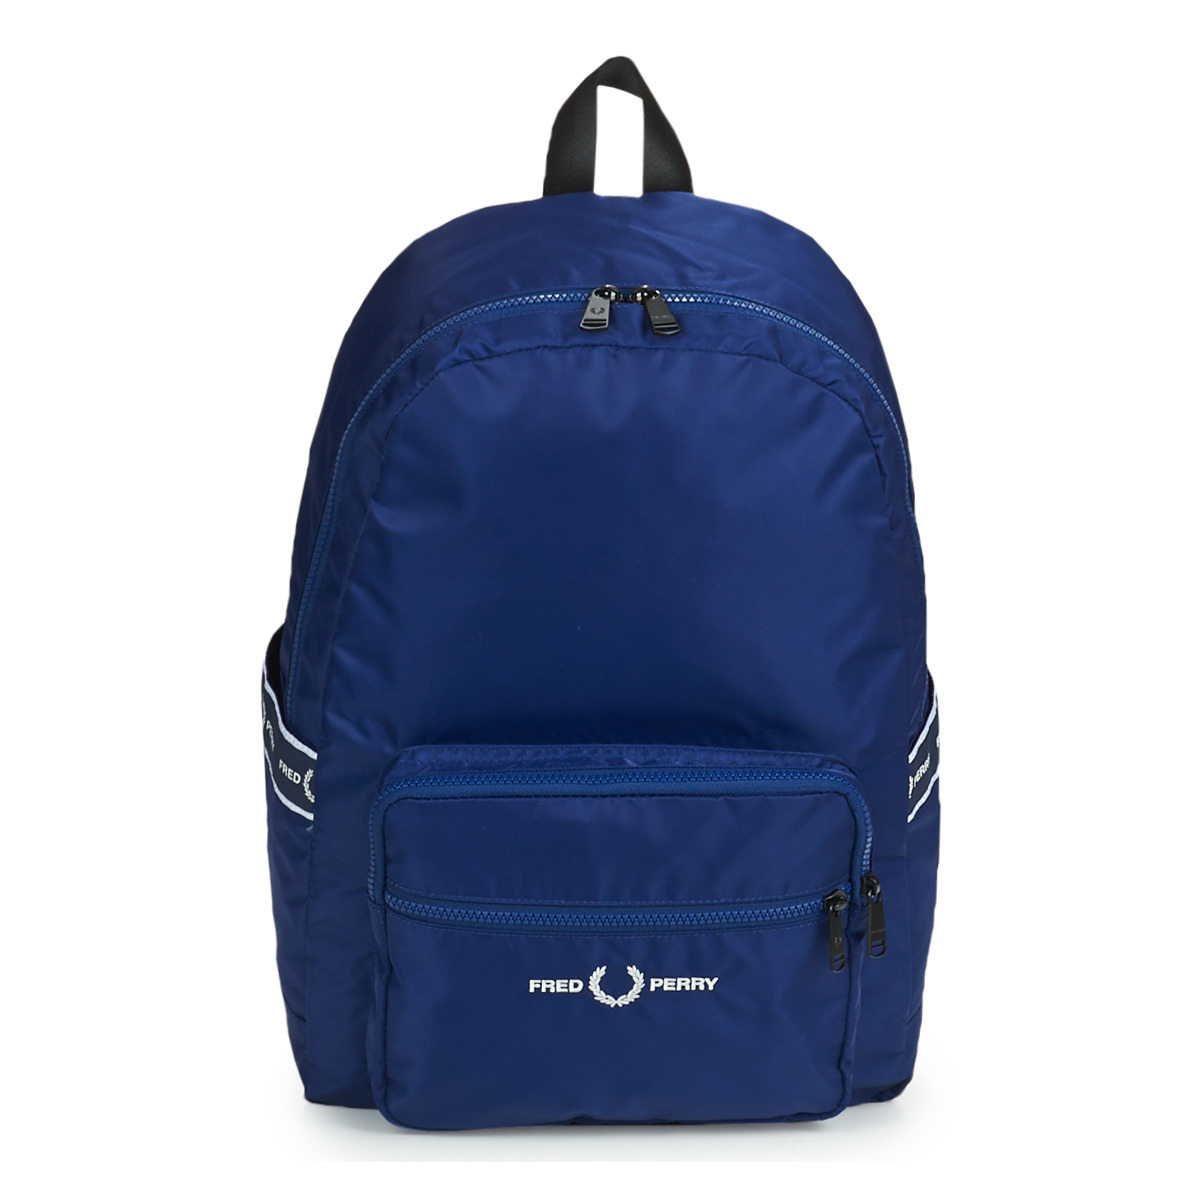 Fred Perry Marine GRAPHIC TAPE BACKPACK 4CReuG5o